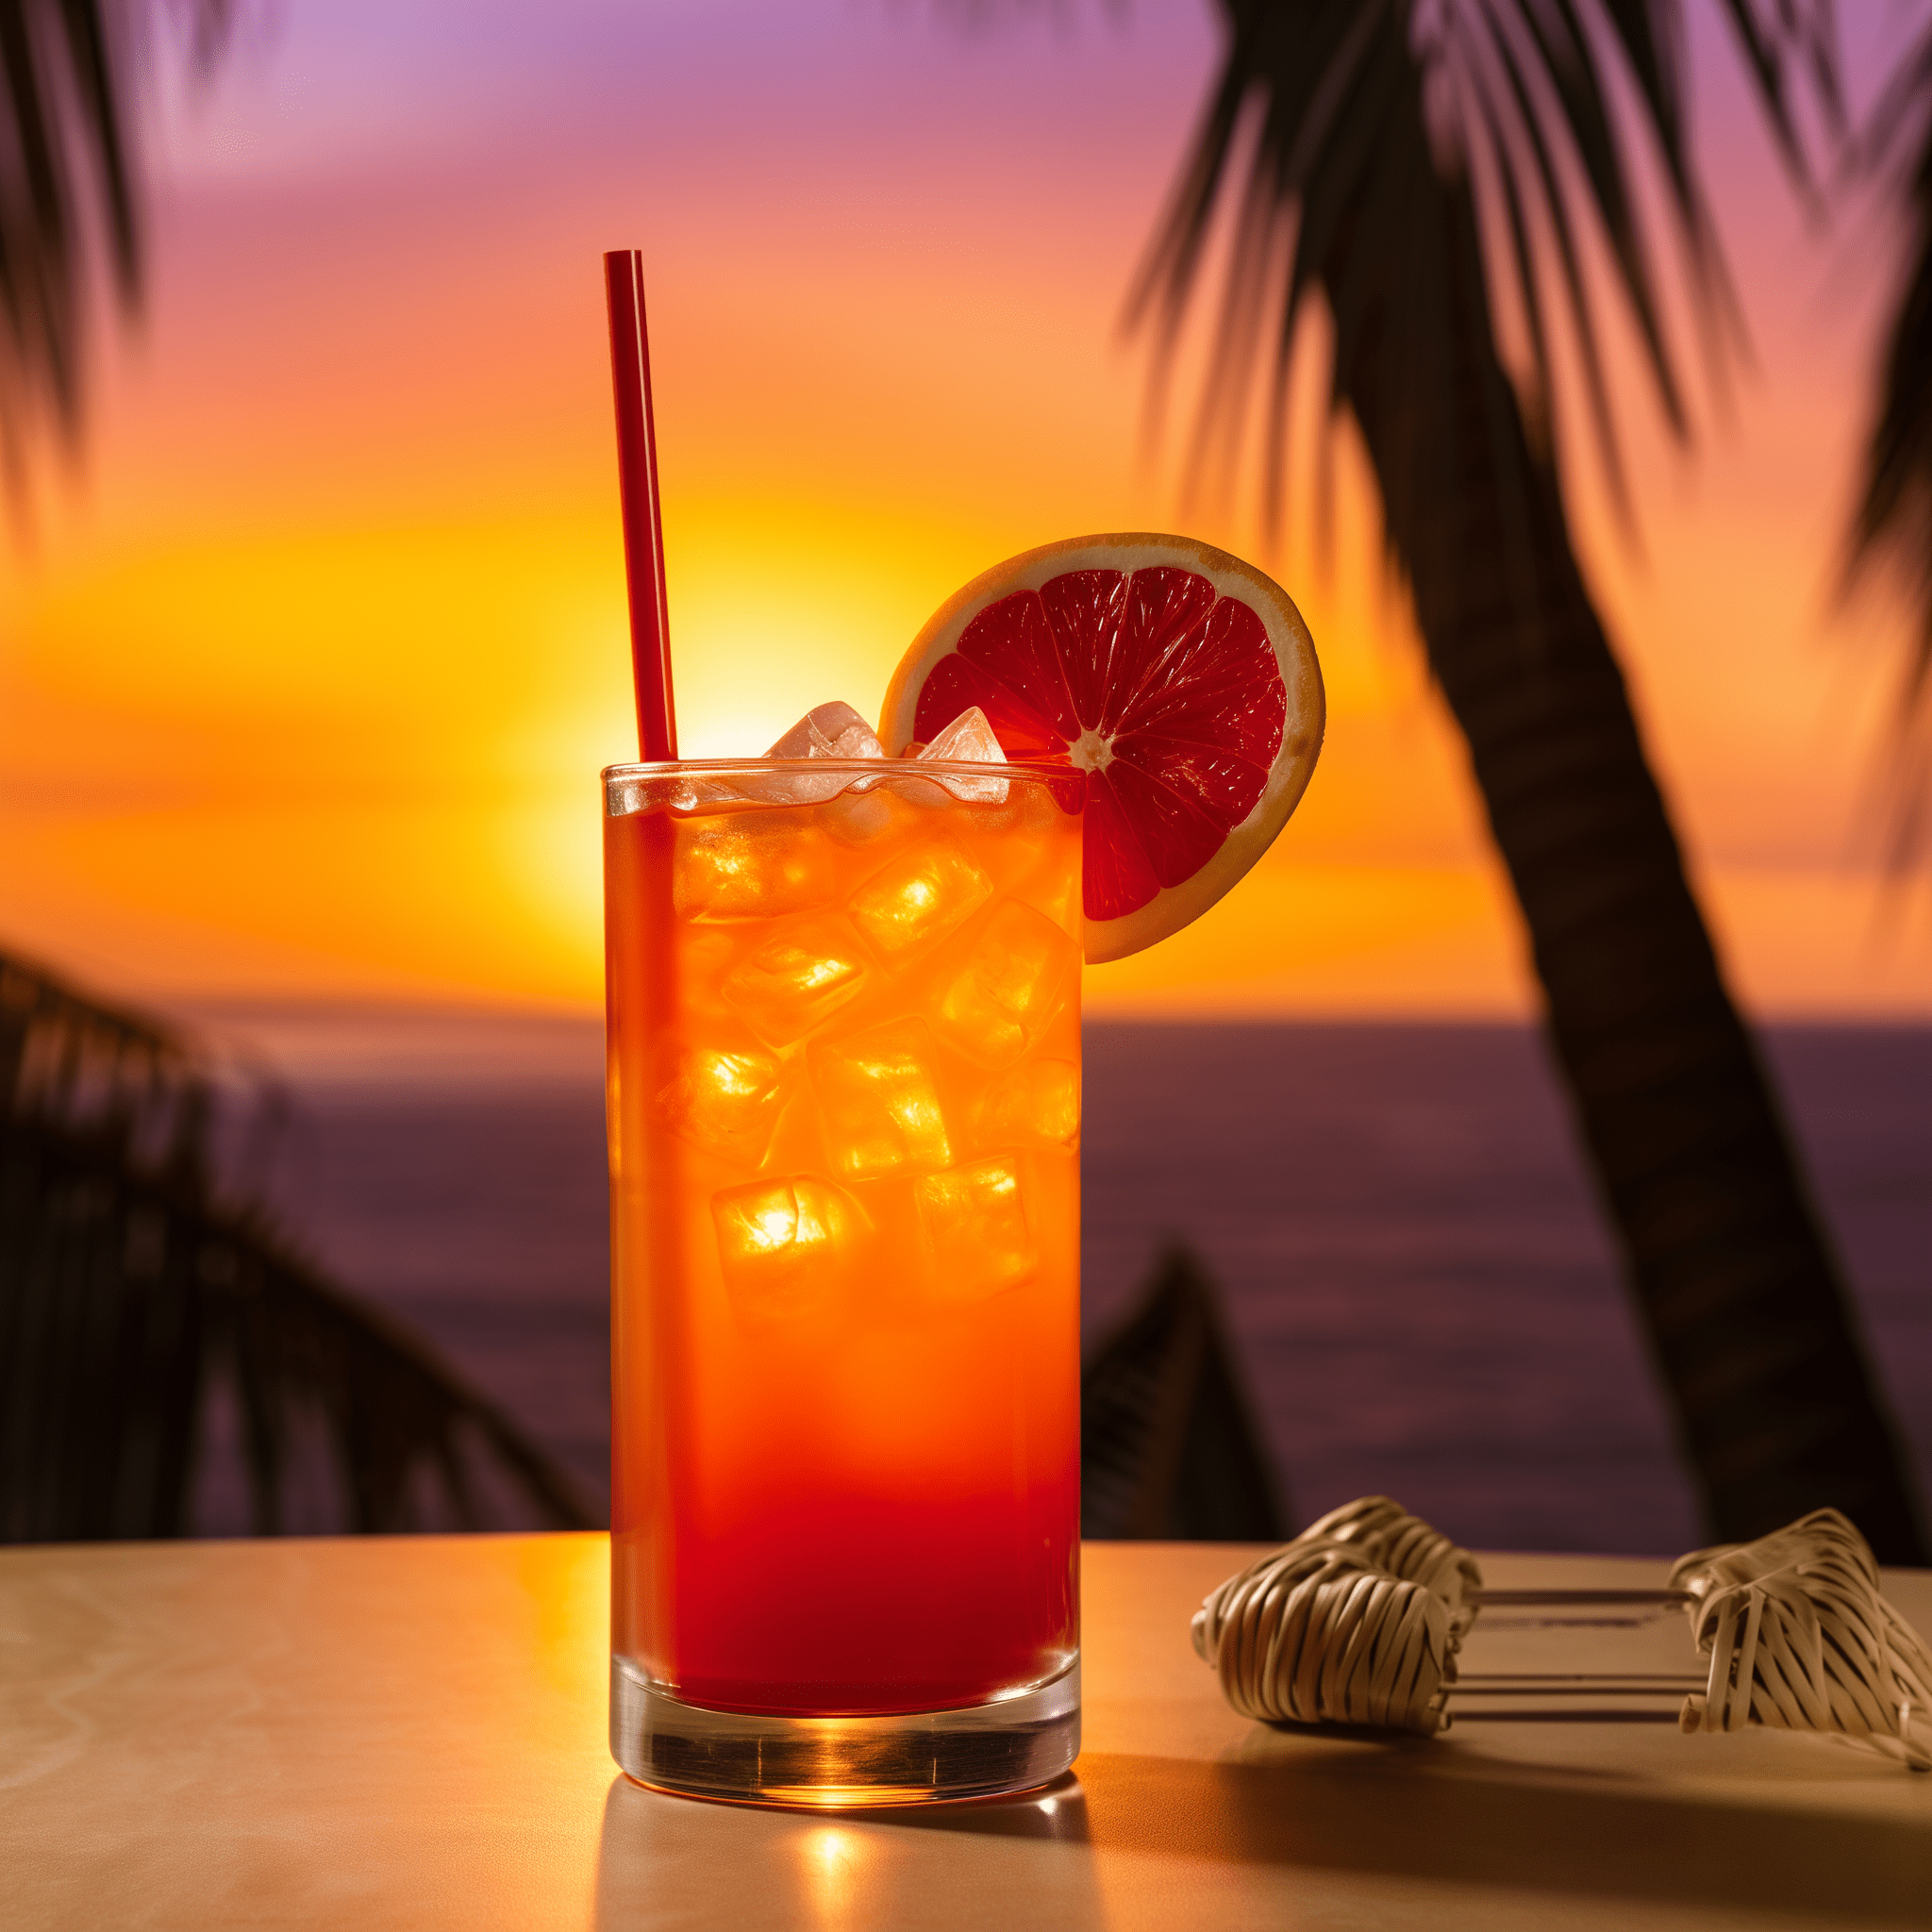 Kiss on the Beach Cocktail Recipe - Kiss on the Beach is a sweet, refreshing cocktail with a fruity profile. The peach juice adds a delicate, nectar-like sweetness, while the cranberry juice provides a tart contrast. The orange juice rounds out the drink with a zesty, citrusy freshness. It's light on the palate and not overly strong in terms of alcohol content.